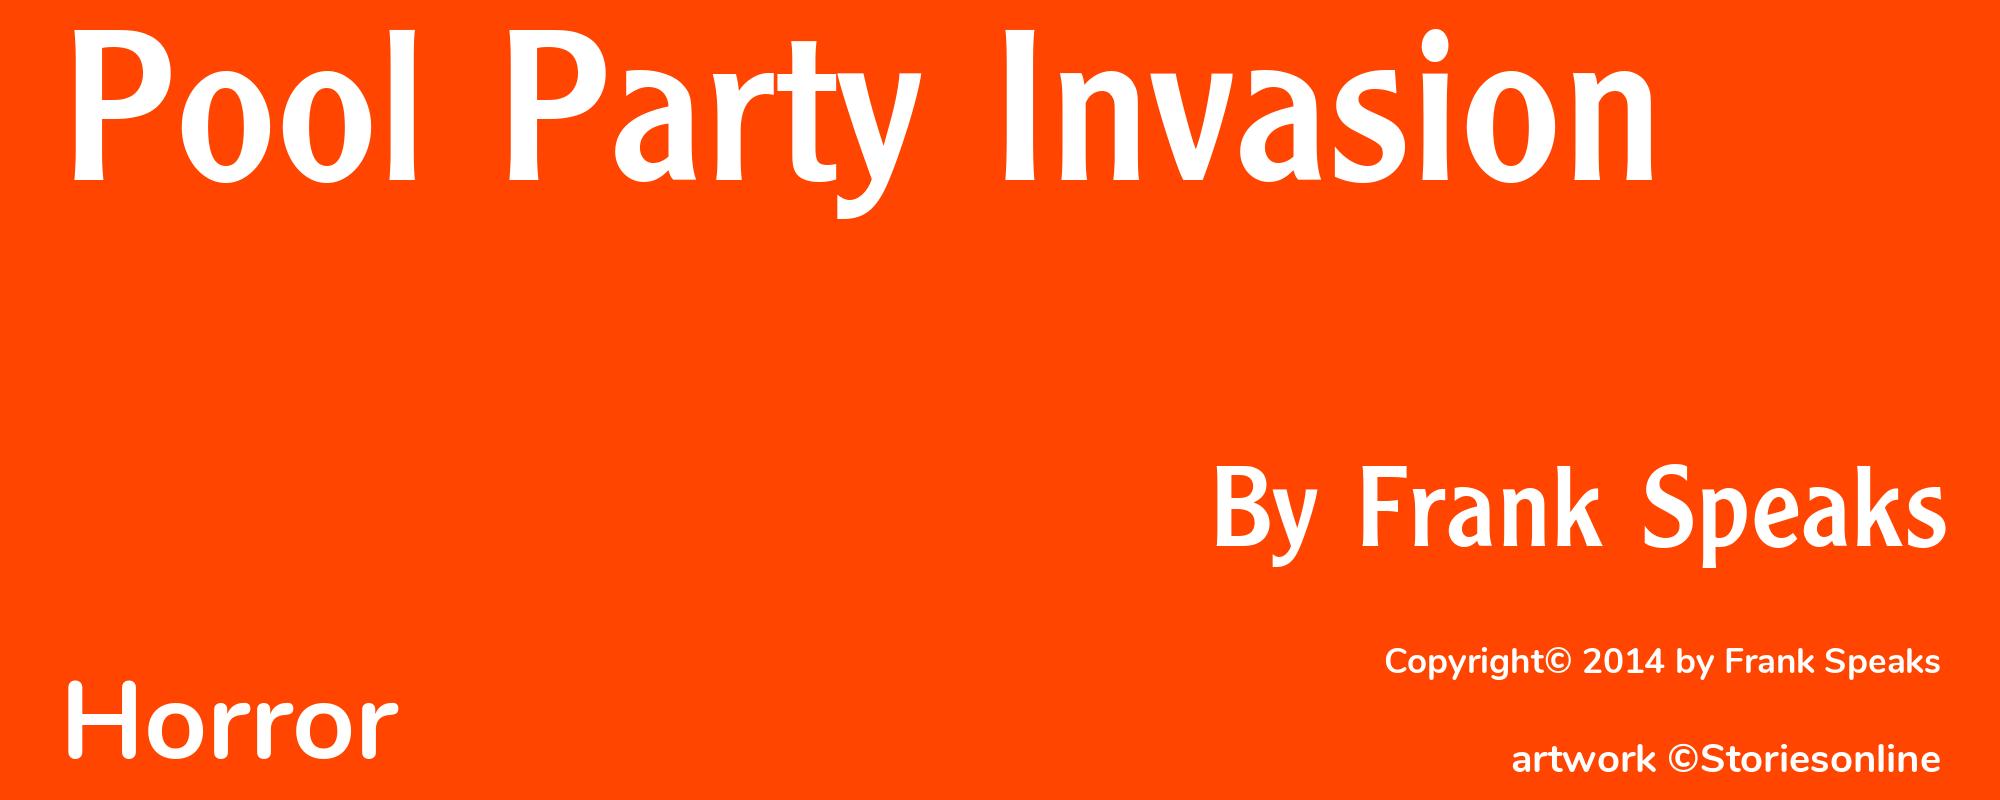 Pool Party Invasion - Cover